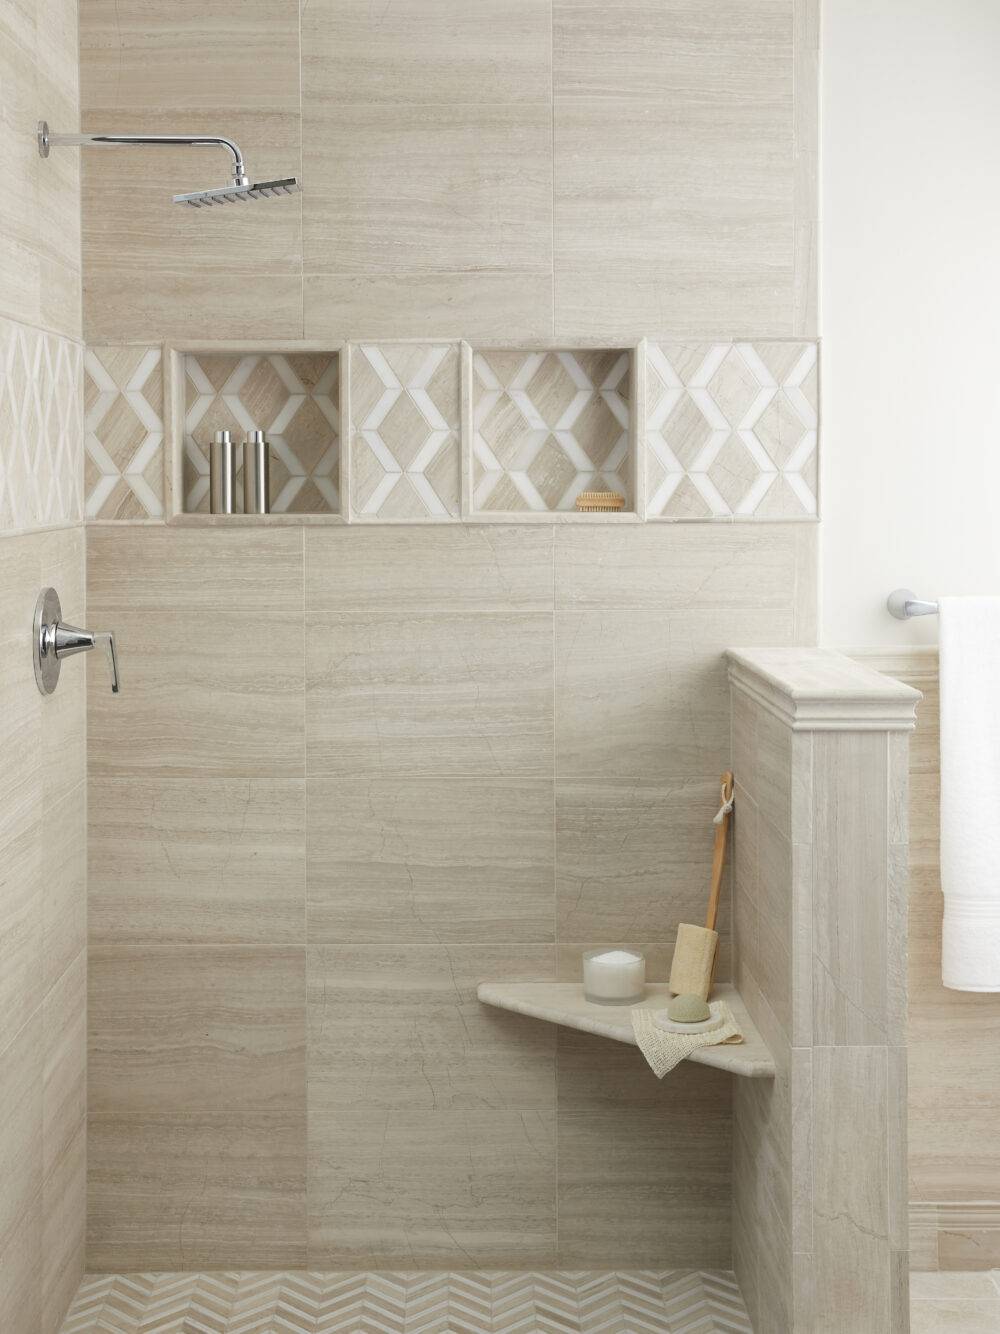 Walk in shower in bathroom area tiled with a vein cut limestone of taupe and grey coloration in several sizes and mosaics alike.  Mosaics are mixed with a white marble. Shower seat is same material. Fixtures are a polished chrome.